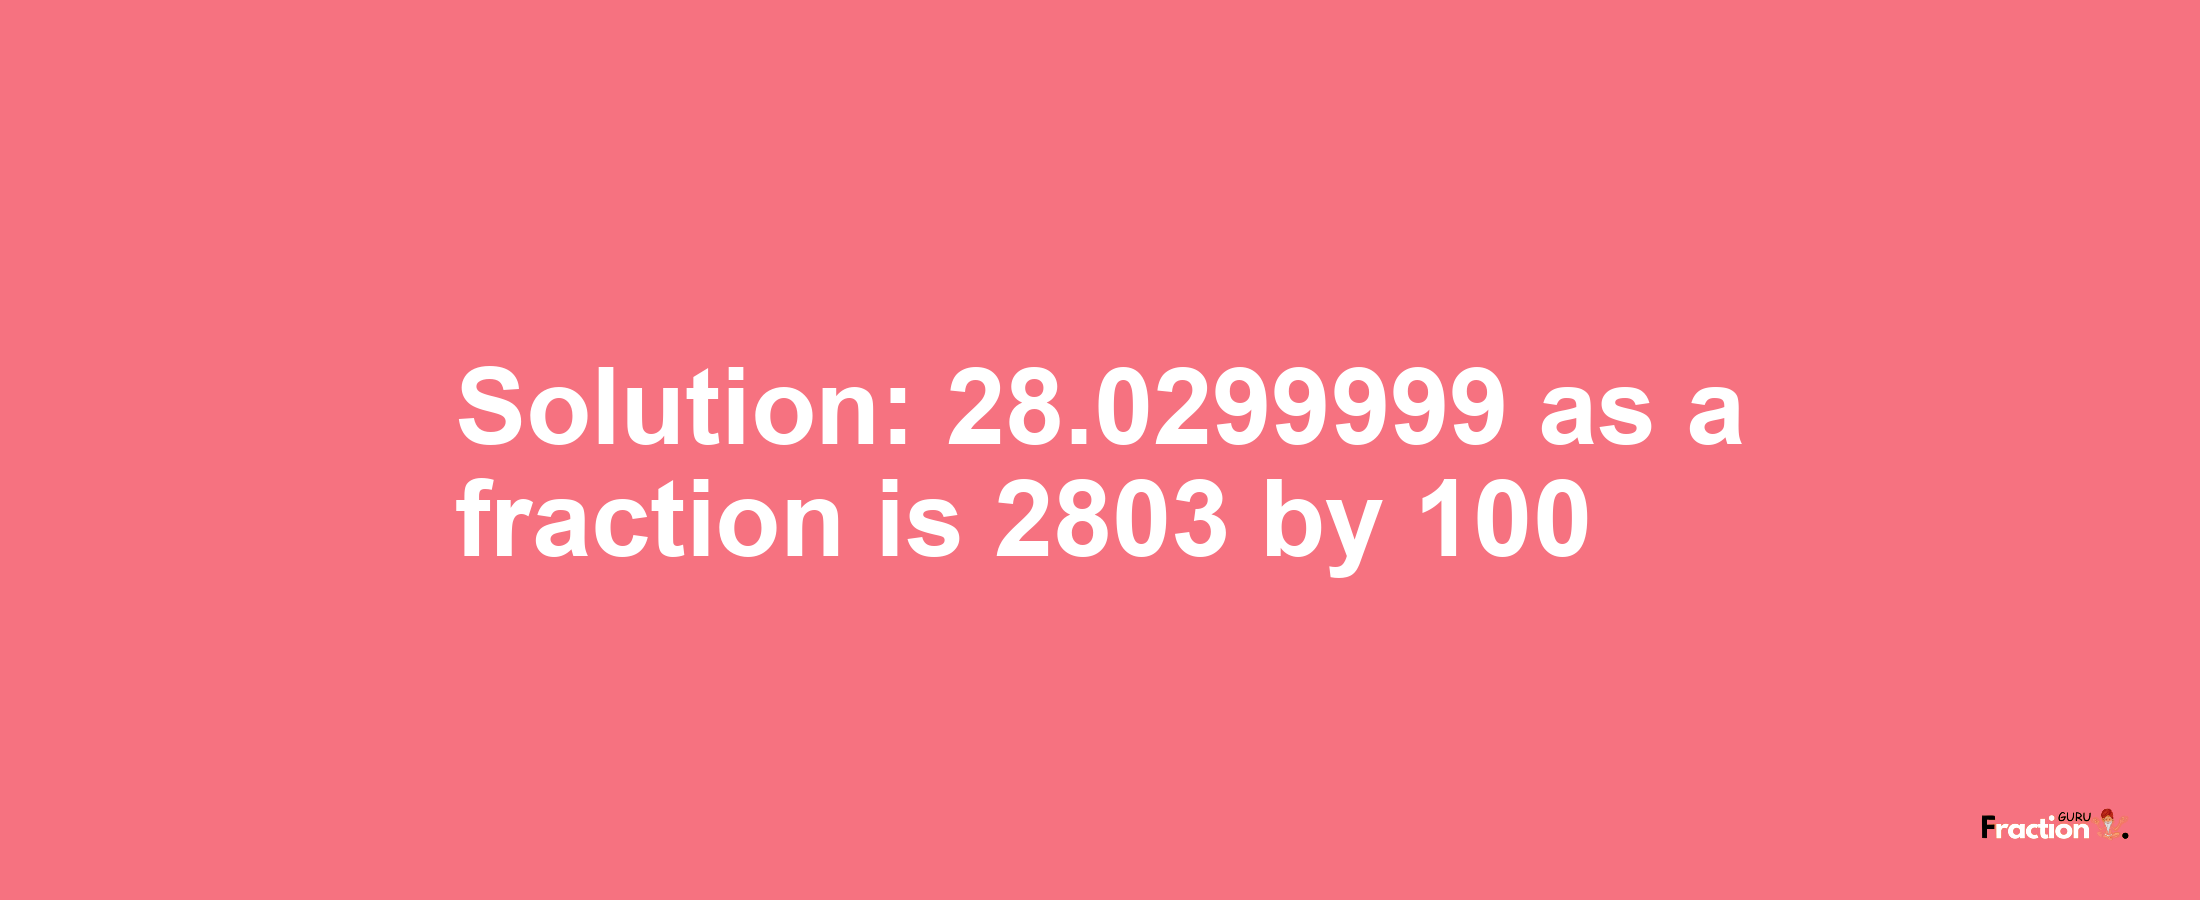 Solution:28.0299999 as a fraction is 2803/100